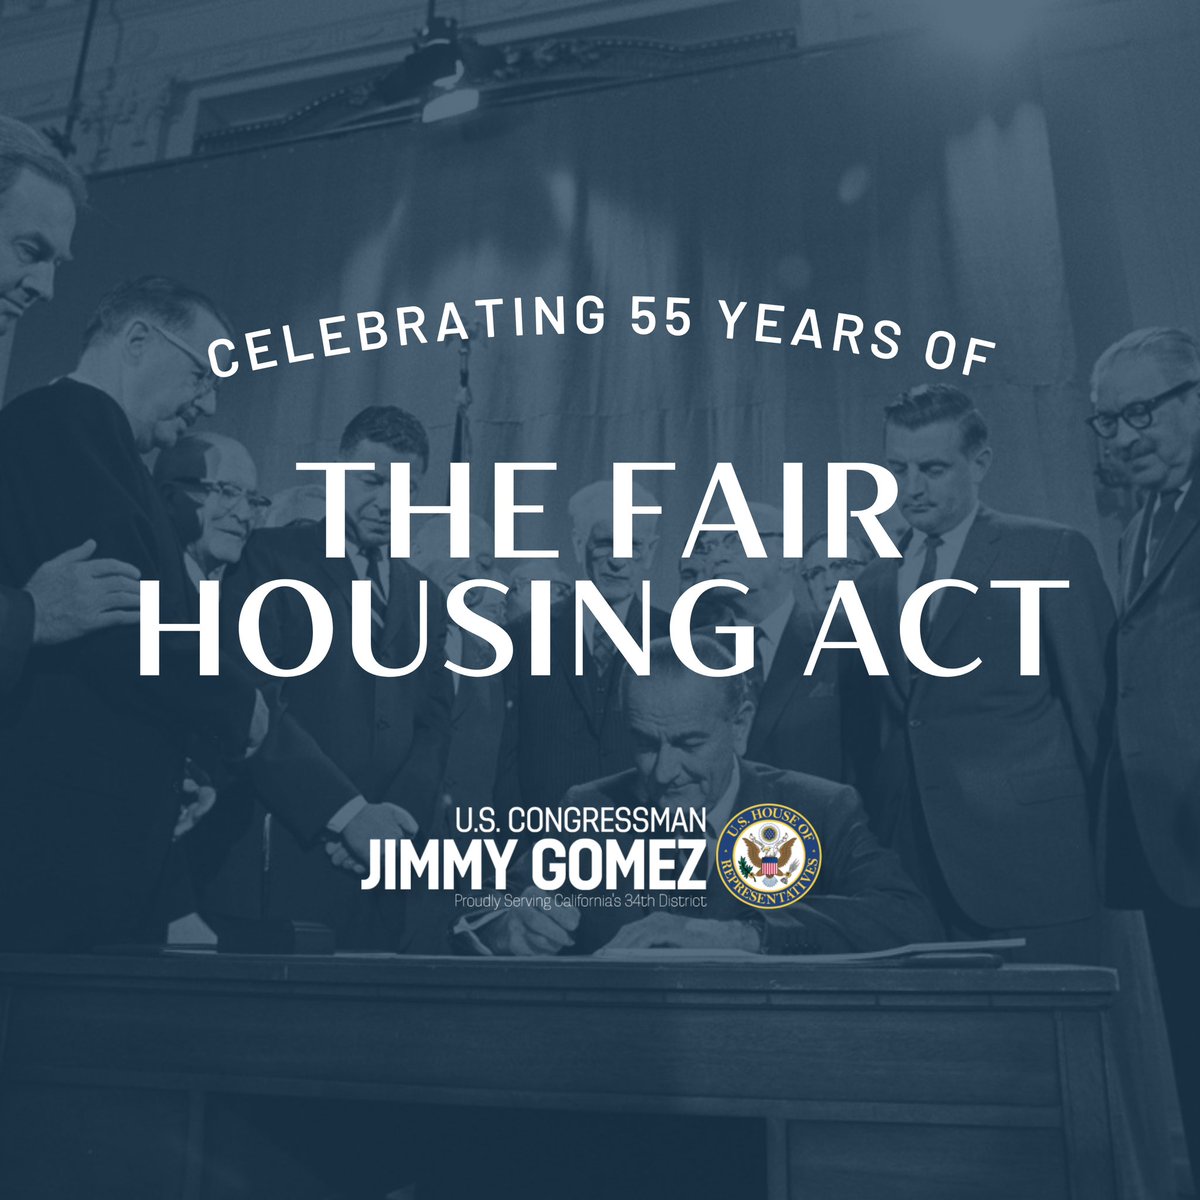 #OTD 55 years ago, the Fair Housing Act became law—a huge step to end housing discrimination. Yet, today, renters still confront barriers. 

I'm leading the #RentersCaucus to remove those barriers, reduce costs and increase the housing supply. Let's build an equitable future! 🏘